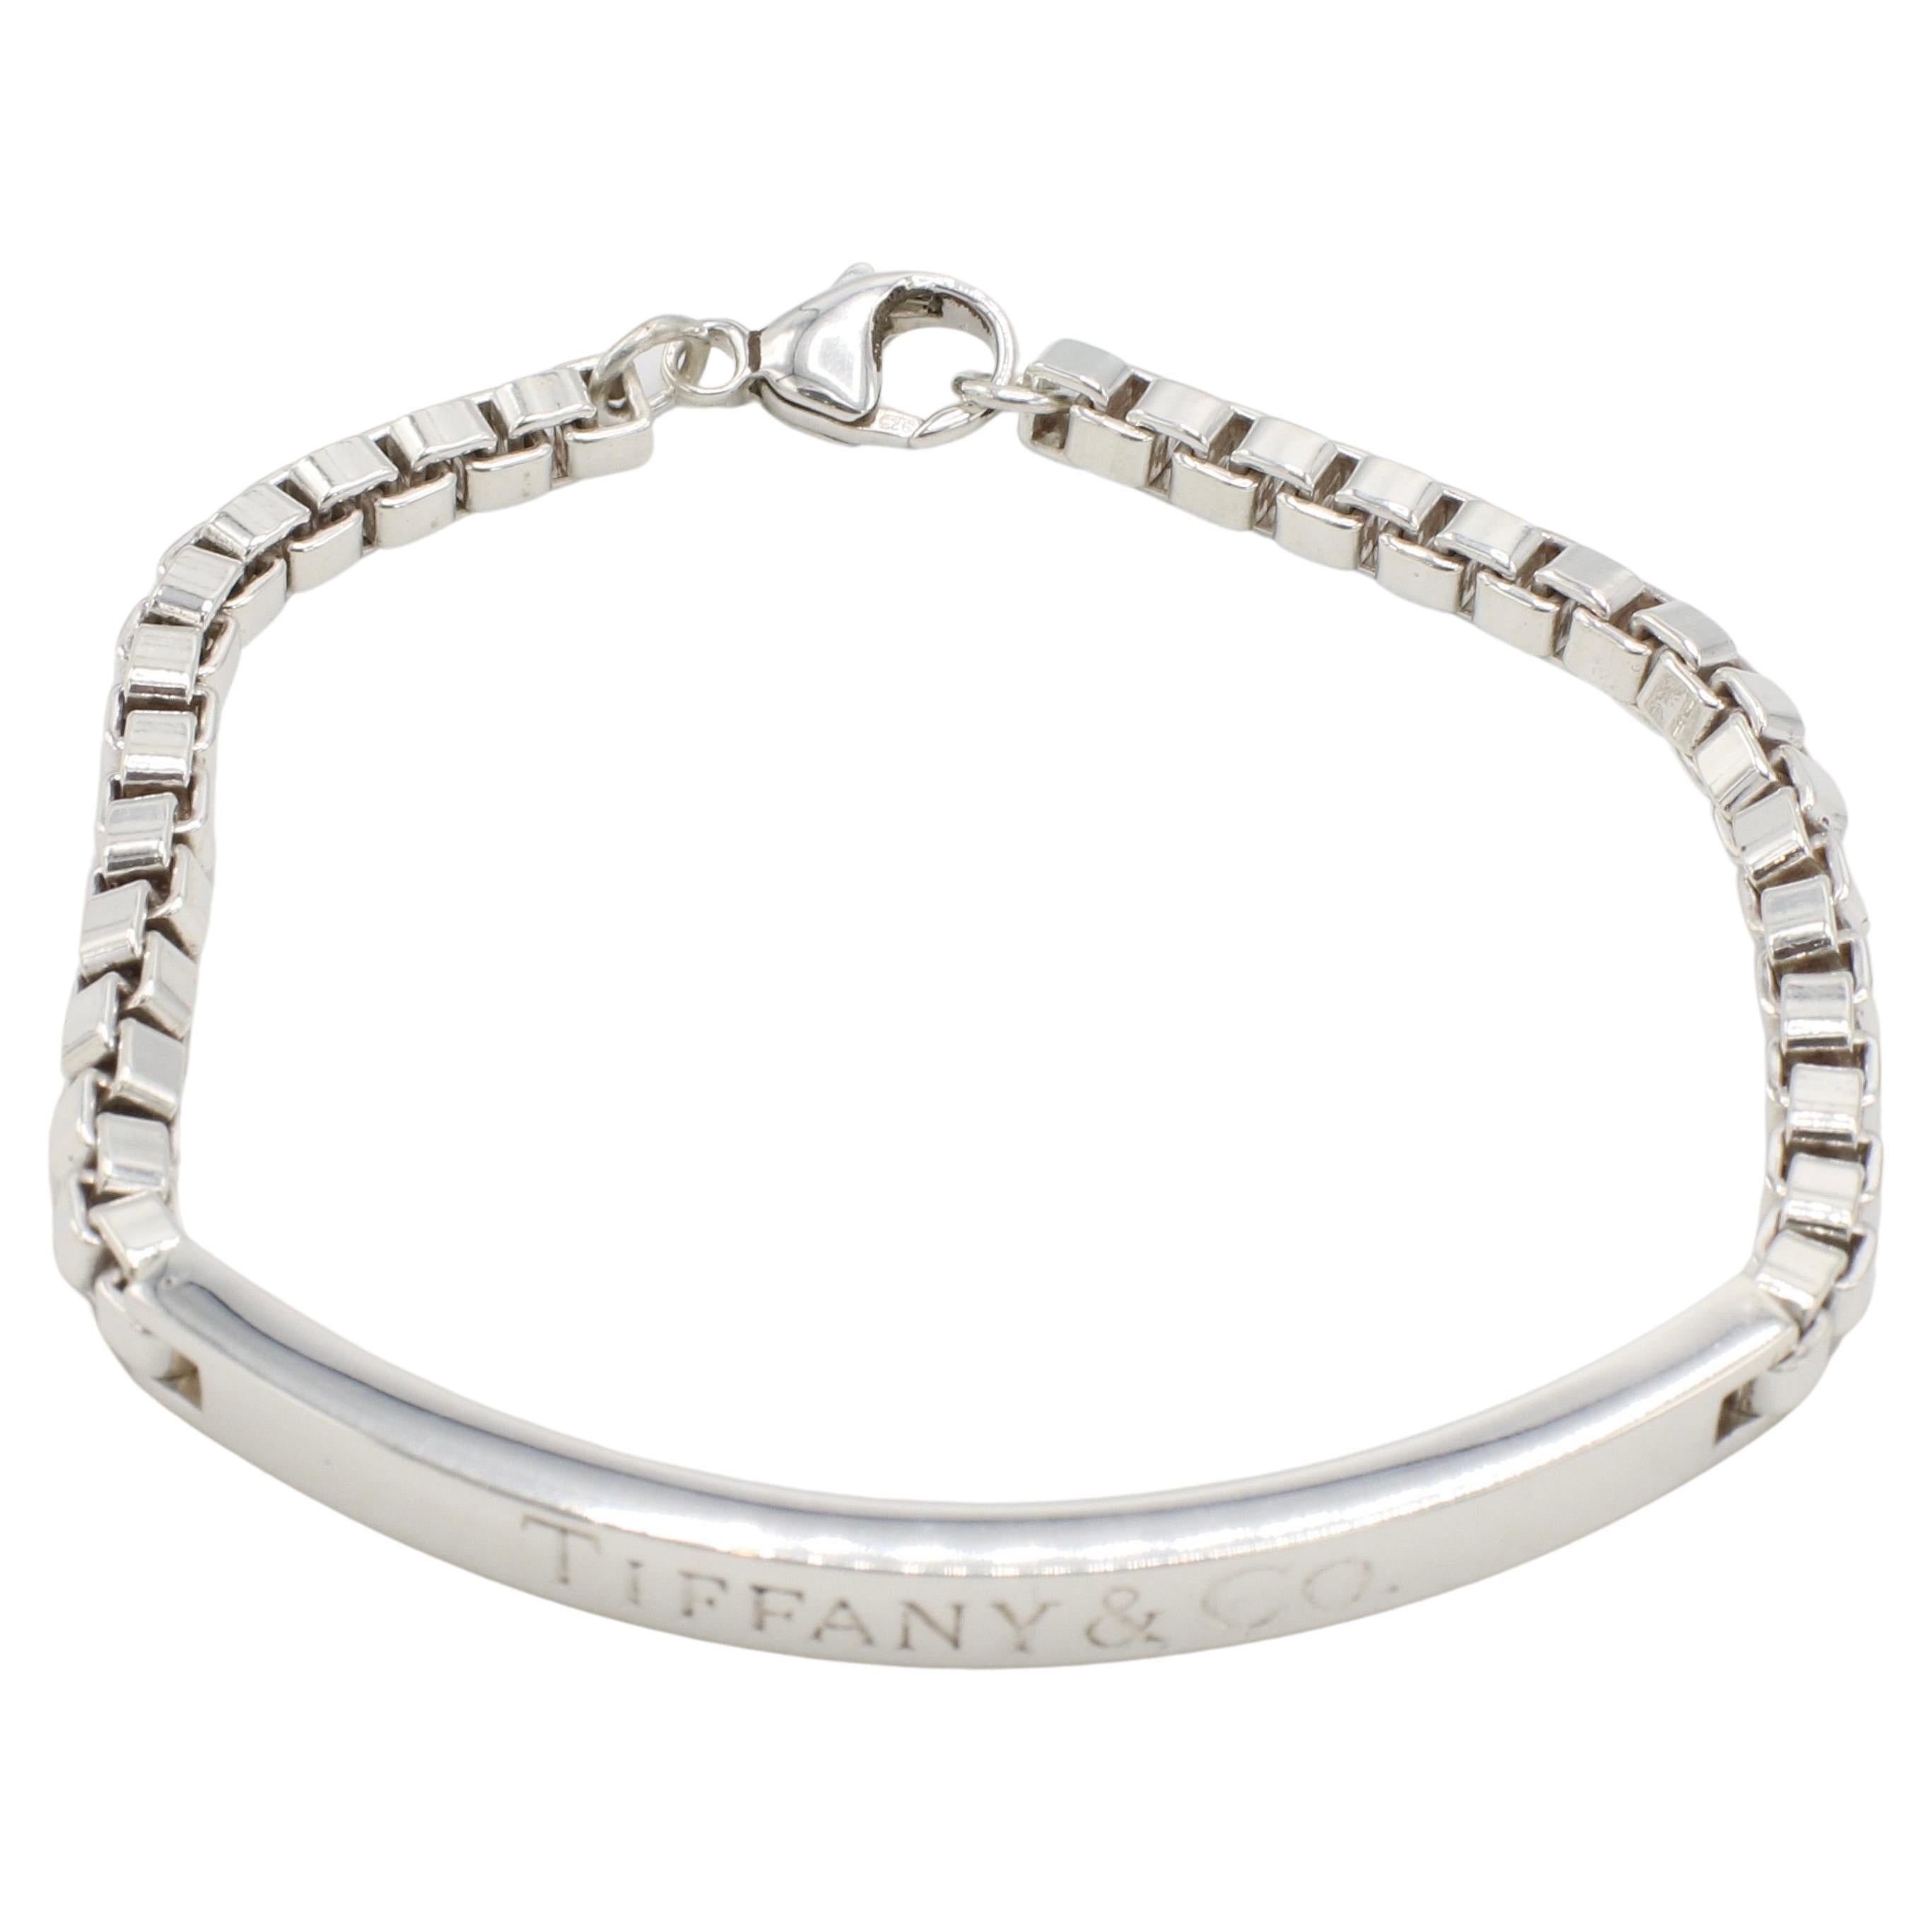 Tiffany & Co. Sterling Silver Venetian Box Link Chain ID Bar Bracelet 
Metal: Sterling silver
Weight: 19 grams
Length: 6.75 inches clasped 
Signed: Tiffany & Co. ©Tiffany & Co. AG925
